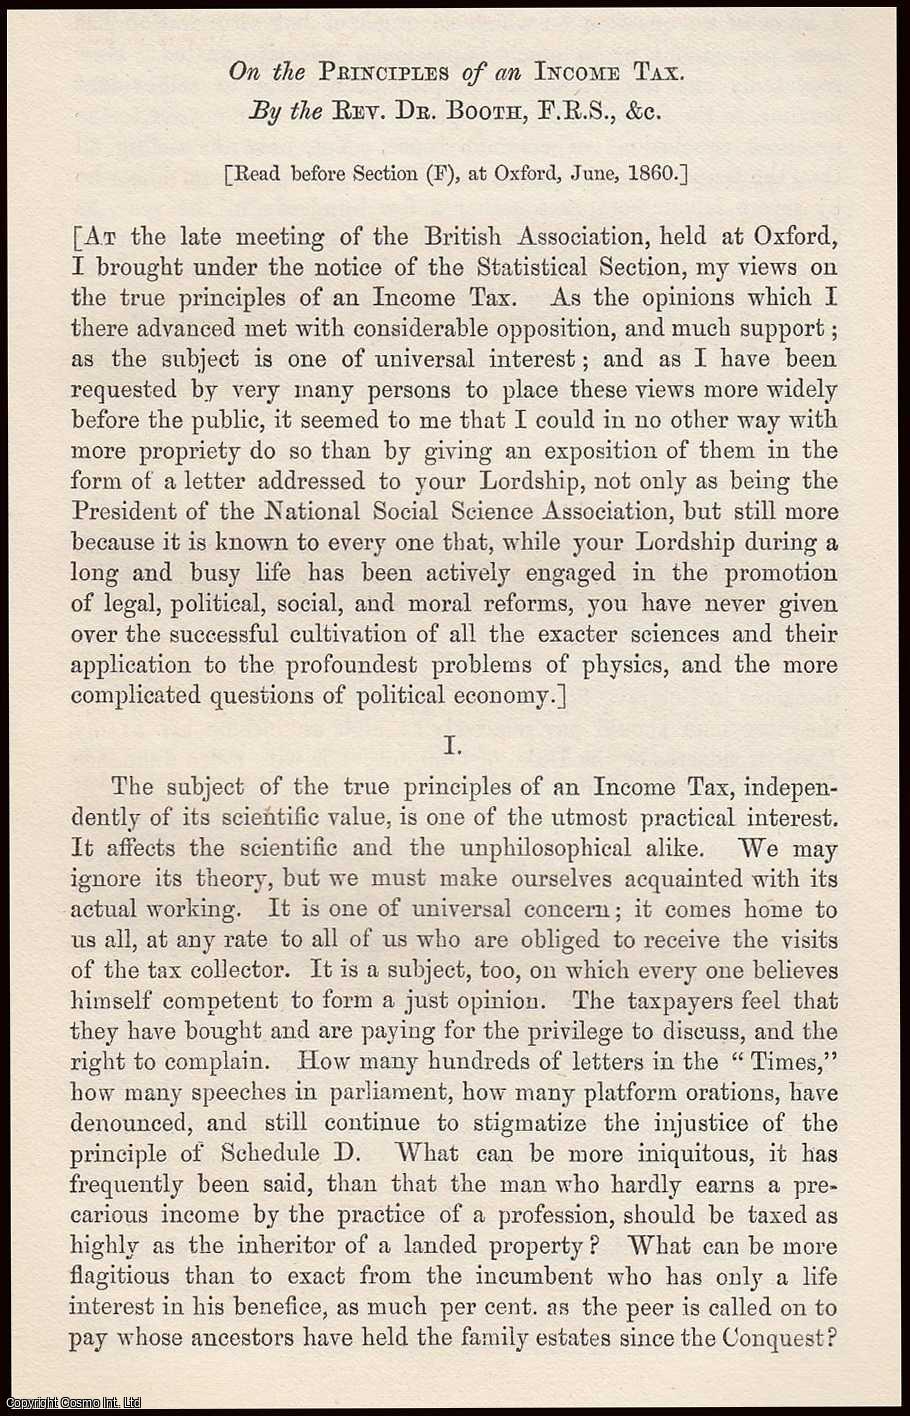 Booth, Dr. Rev. - On the Principles of an Income Tax. A rare original article from the Journal of the Royal Statistical Society of London, 1860.